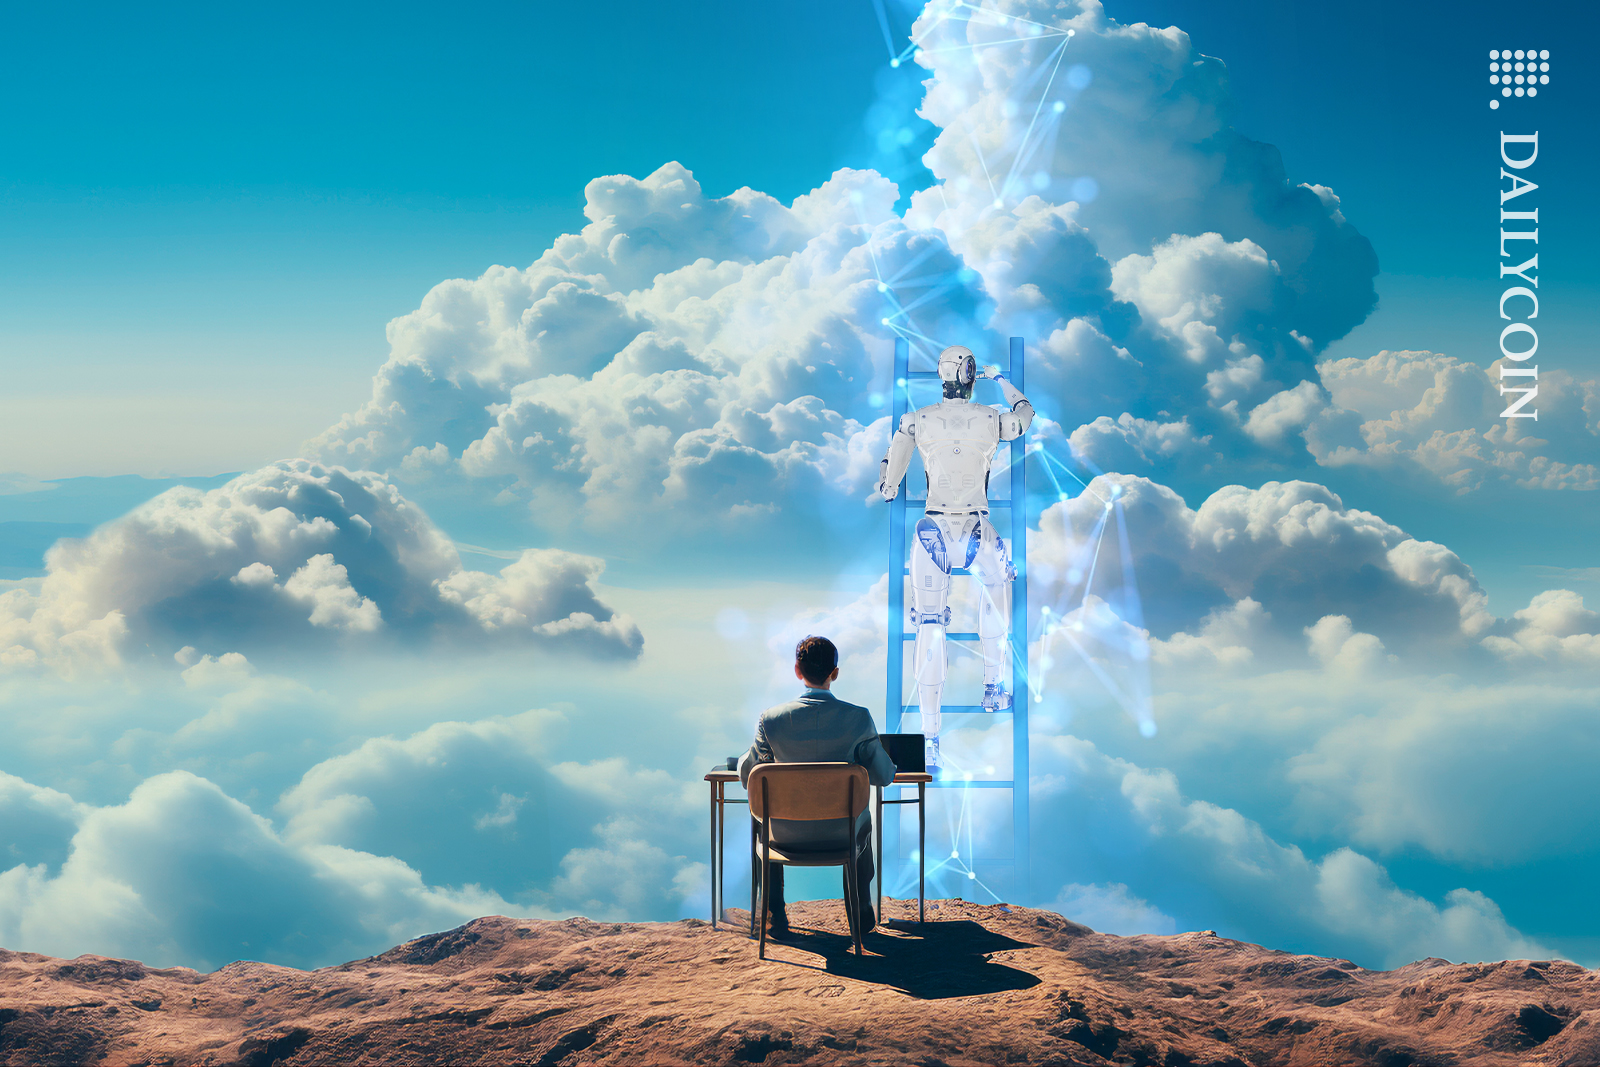 Guy with a computer on top of a cliff watching a robot climb a blockchain ladder.